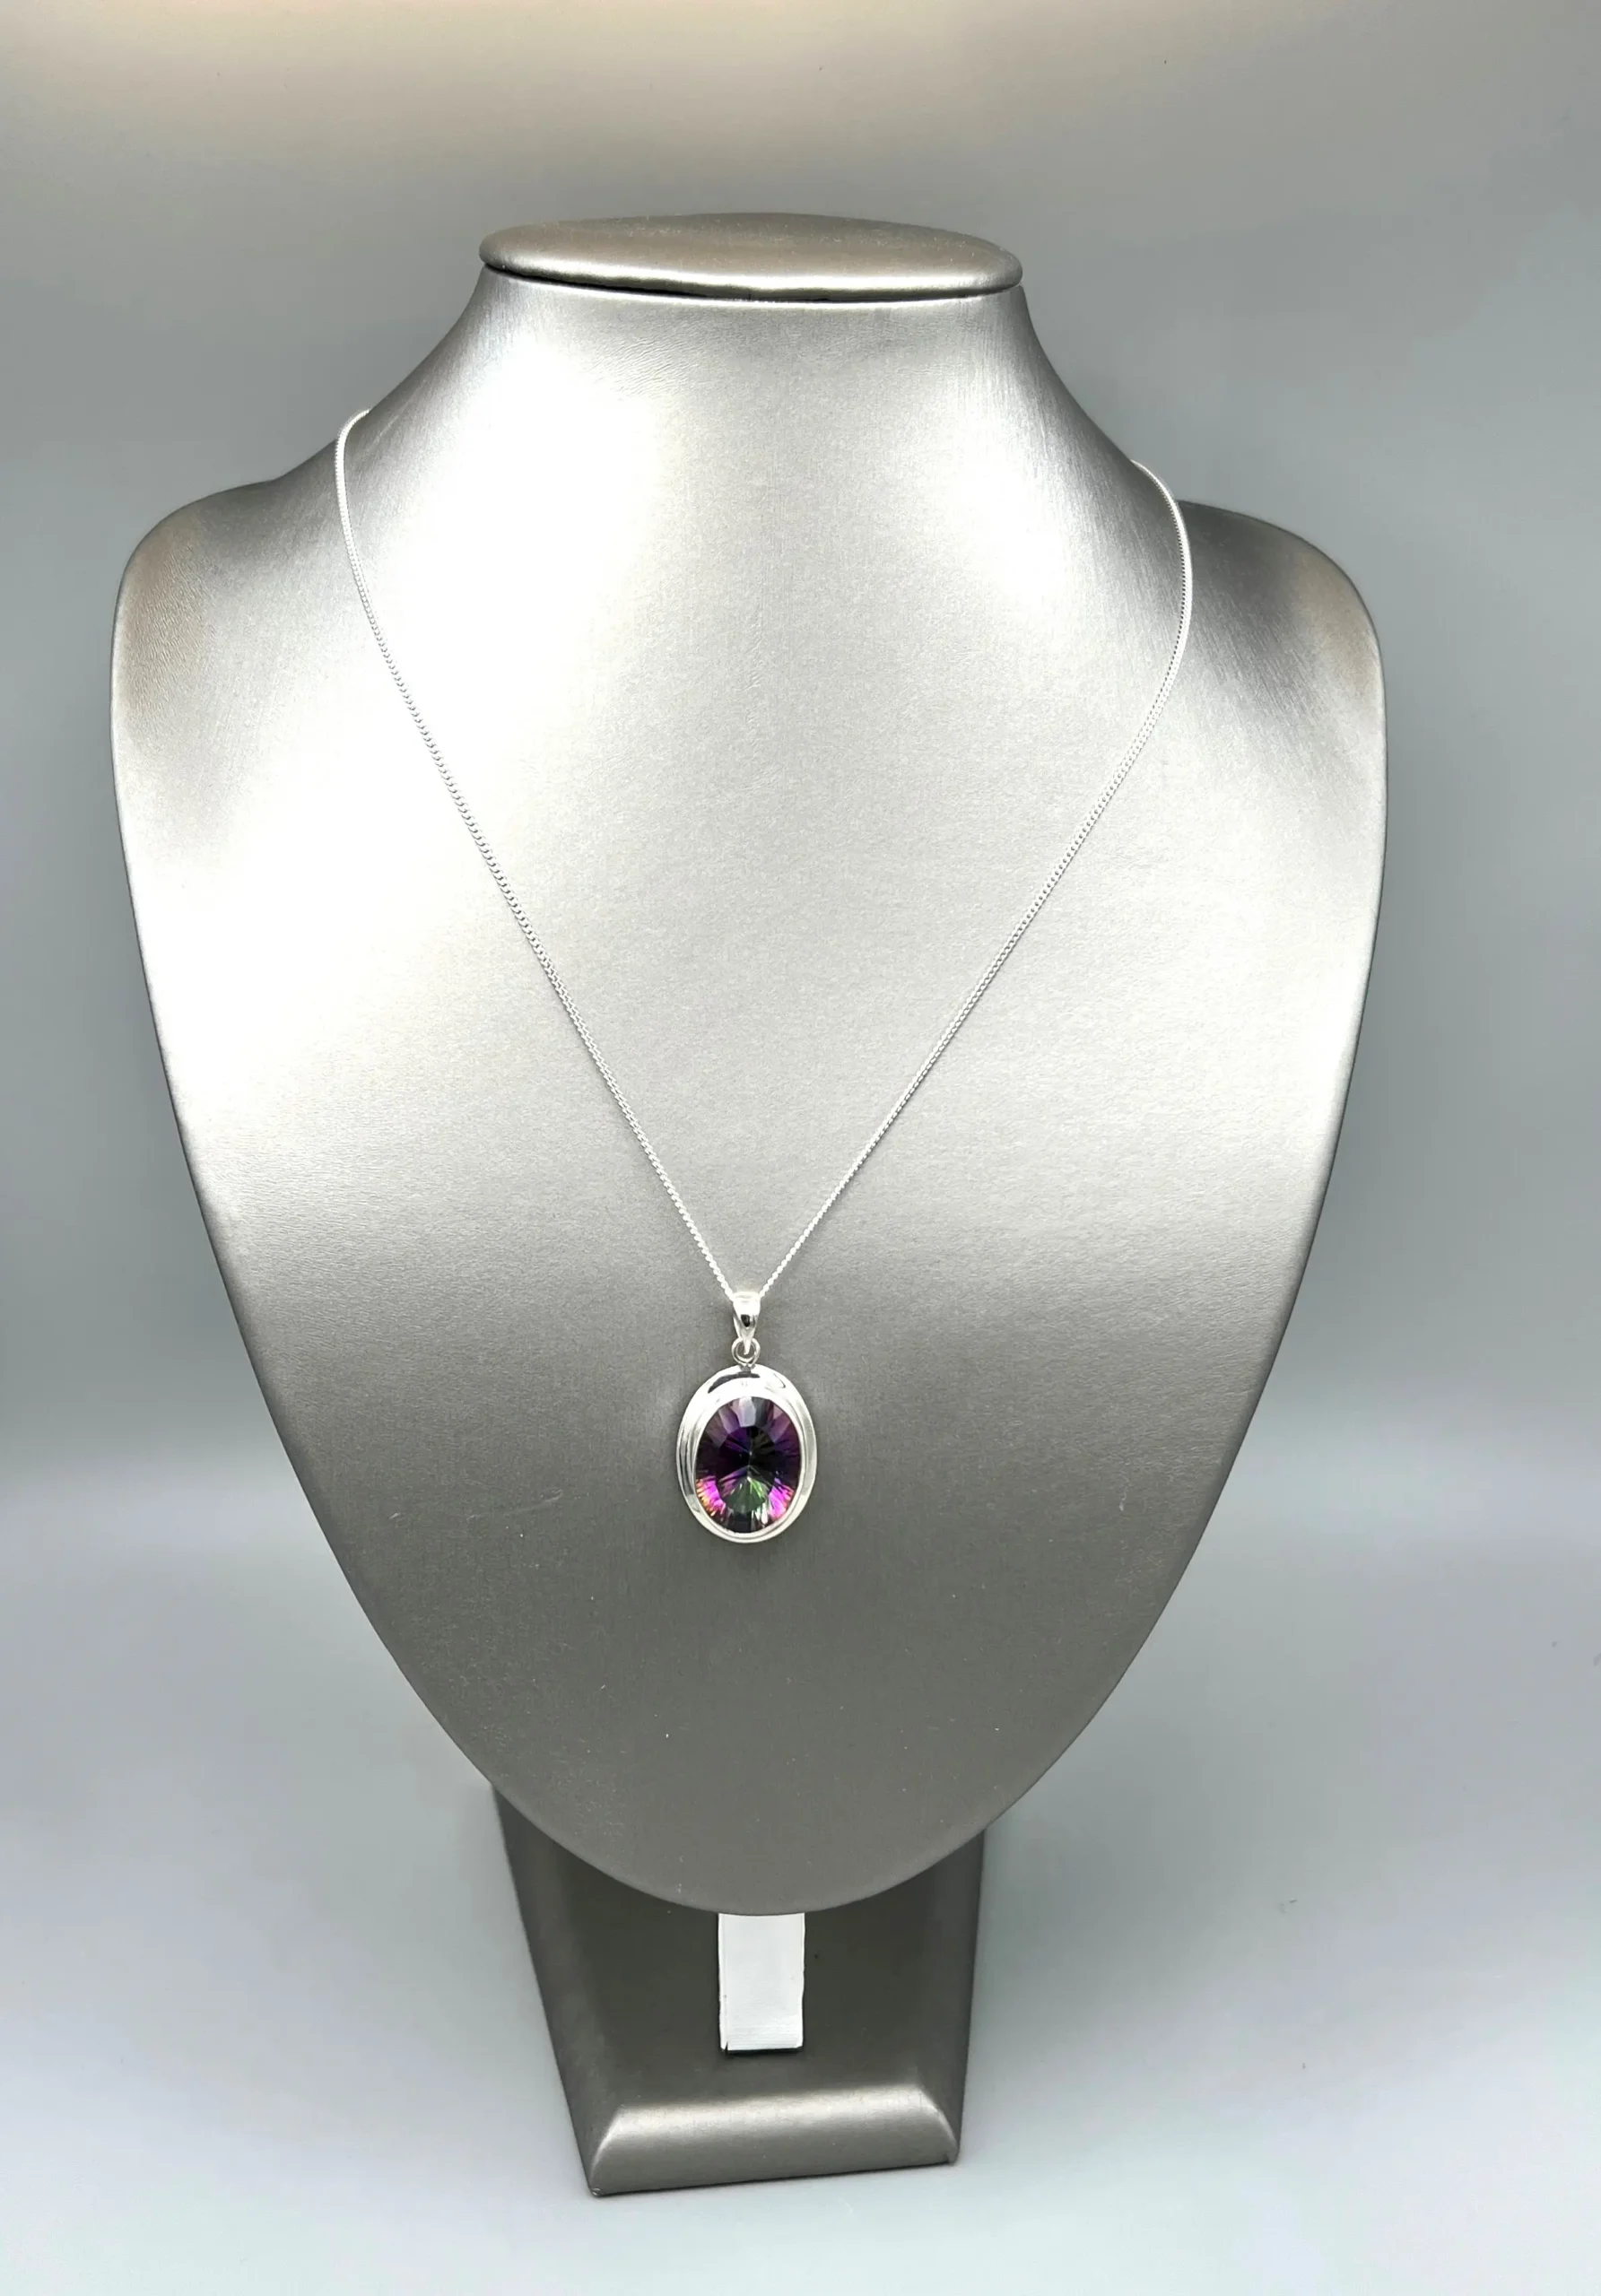 Silver Mystic Topaz Pendant Necklace With Gemstone, Sewar Silver Mystic Topaz Pendant Necklace With Gemstone